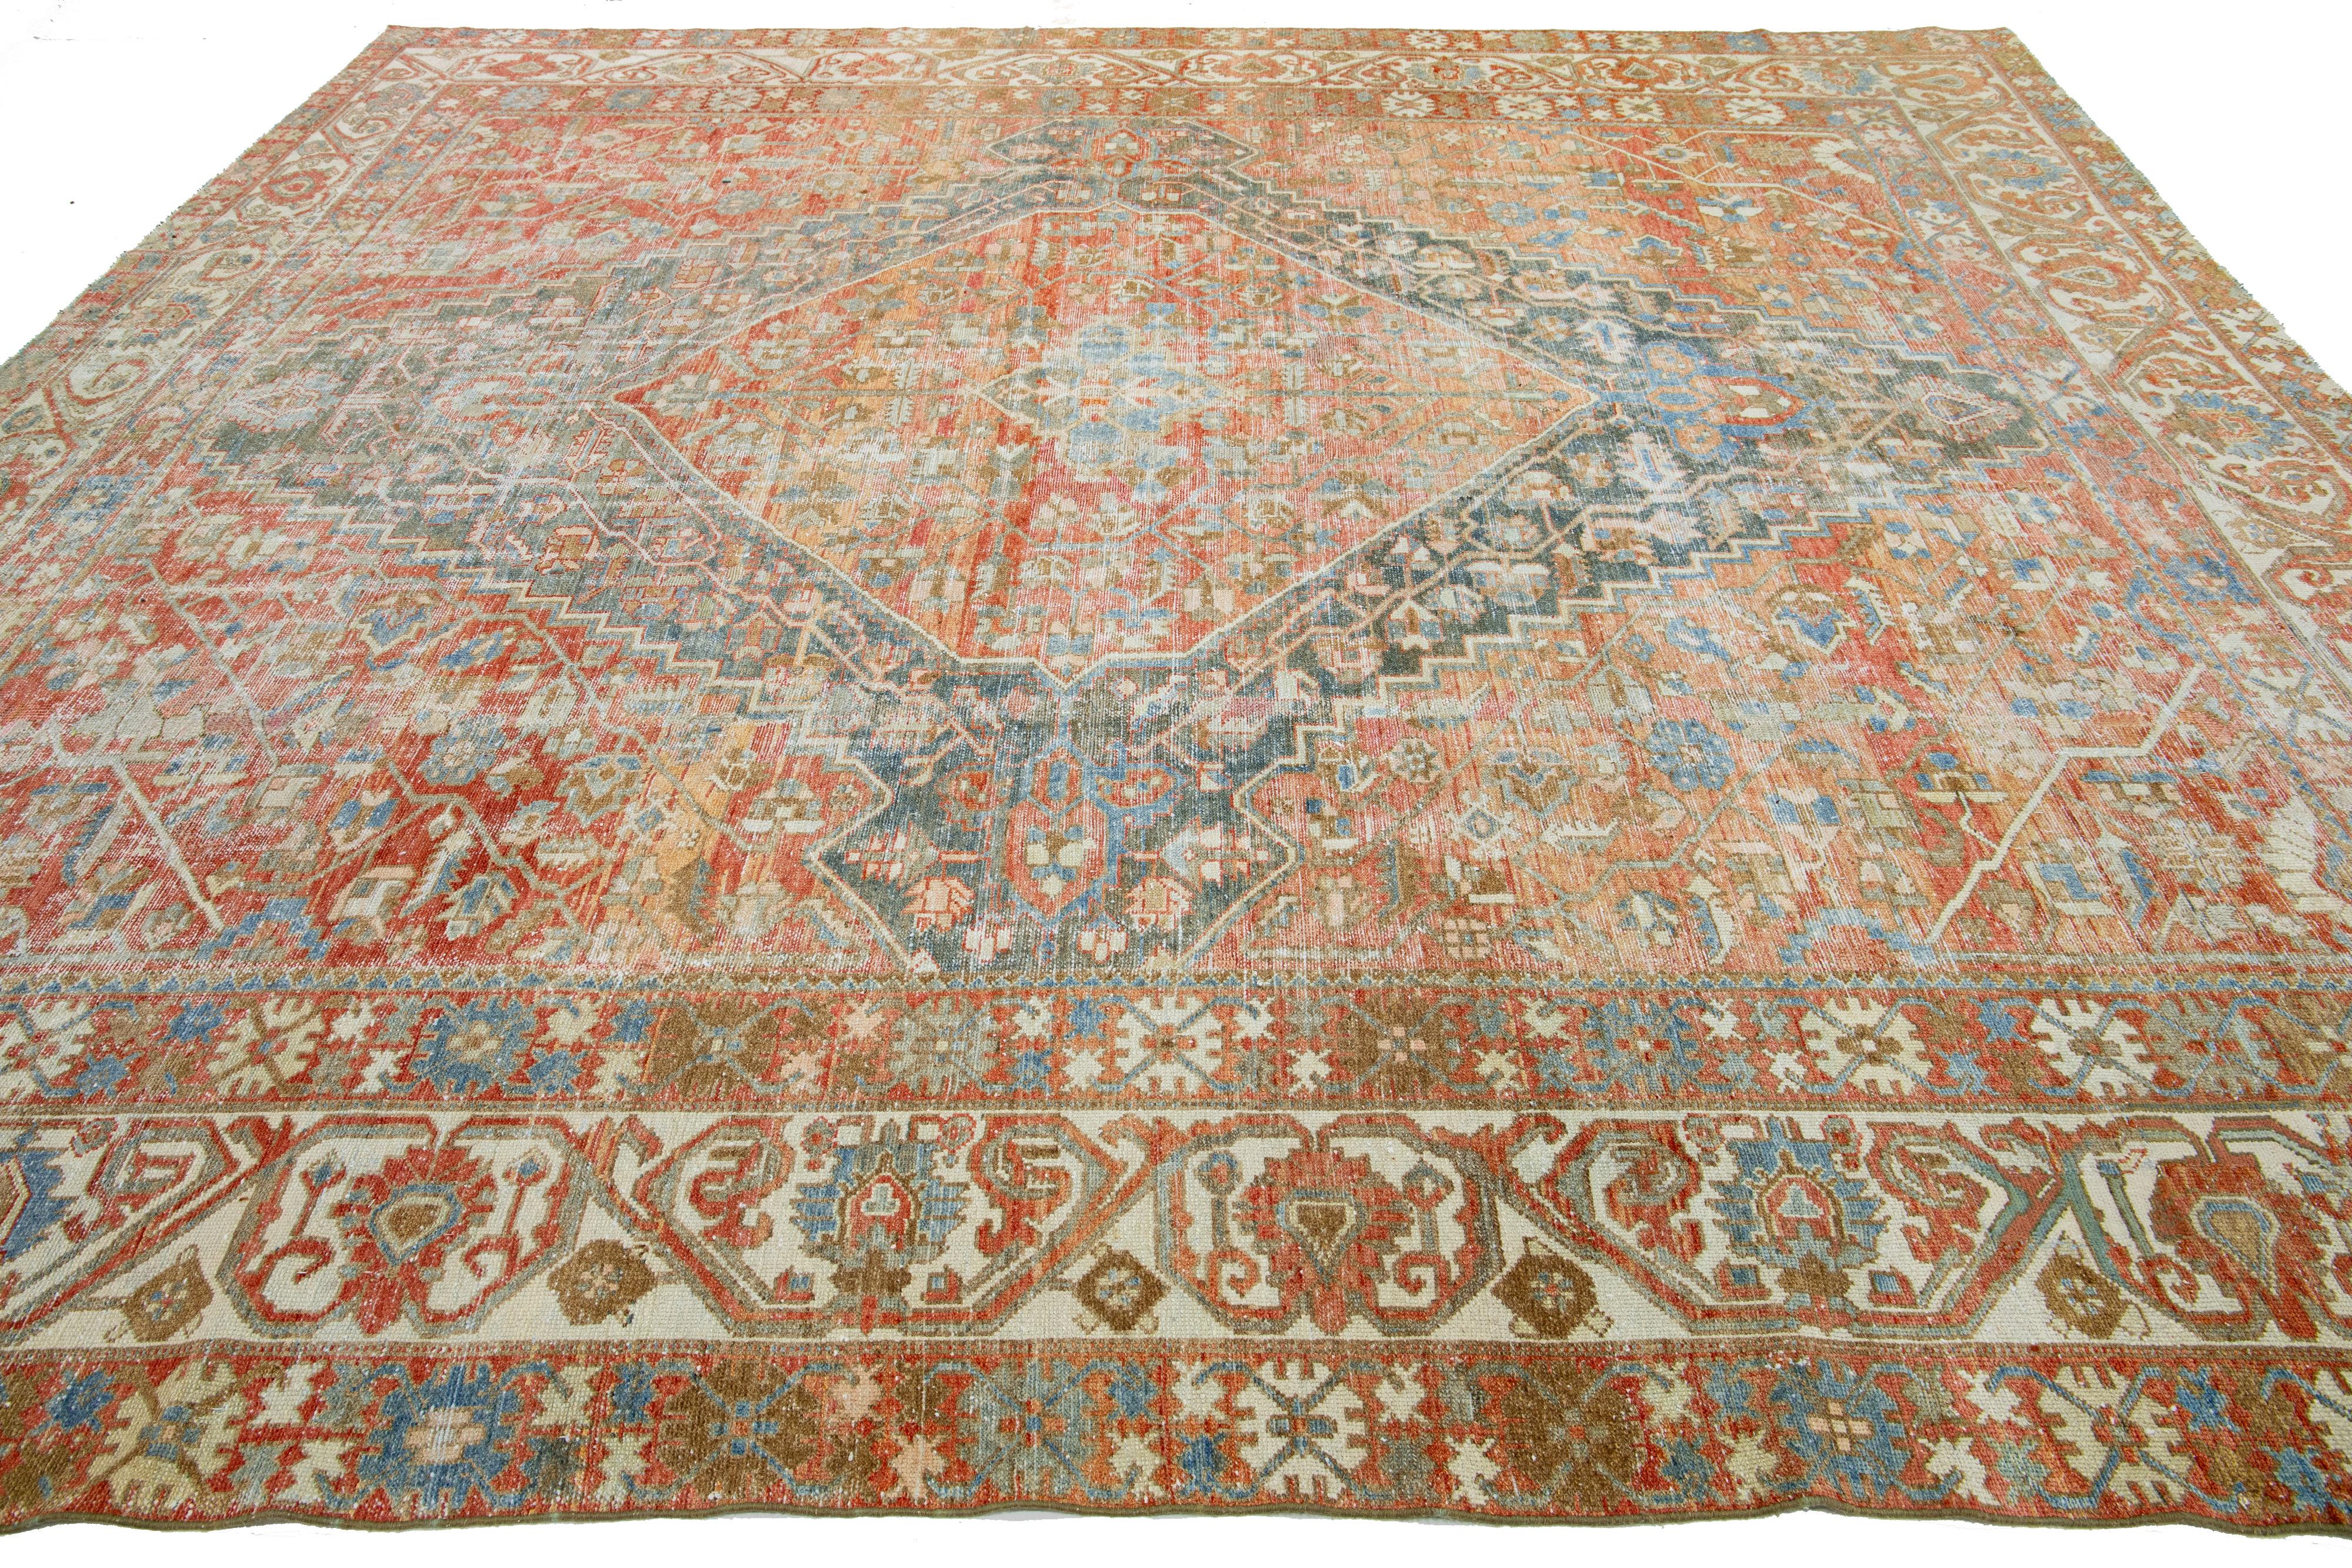 Hand-Knotted Allover 1900s Antique Persian Bakhtiari Wool Rug In Rust Color  For Sale